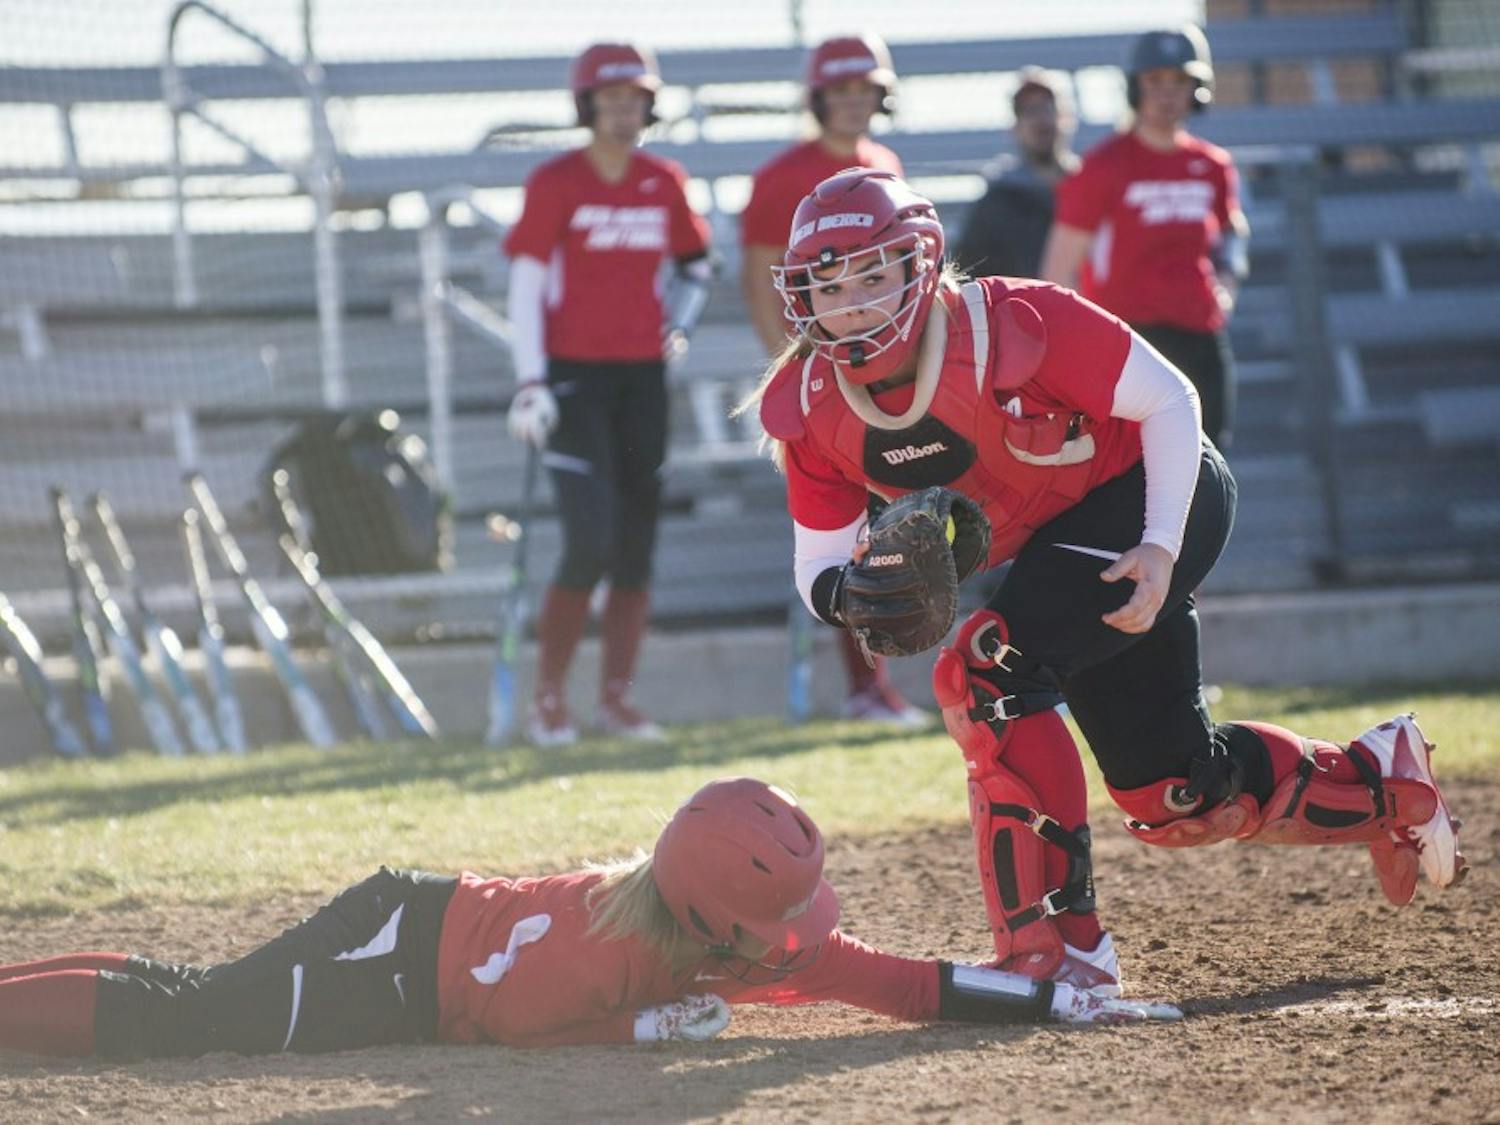 Sophomore catcher Chelsea Johnson makes a play during the Lobos' first practice of the season Monday, Feb. 8, 2016&nbsp;at Santa Ana Star Field. The Lobos won three out of five games during the UC Davis Tournament this past weekend in Davis, California.&nbsp;